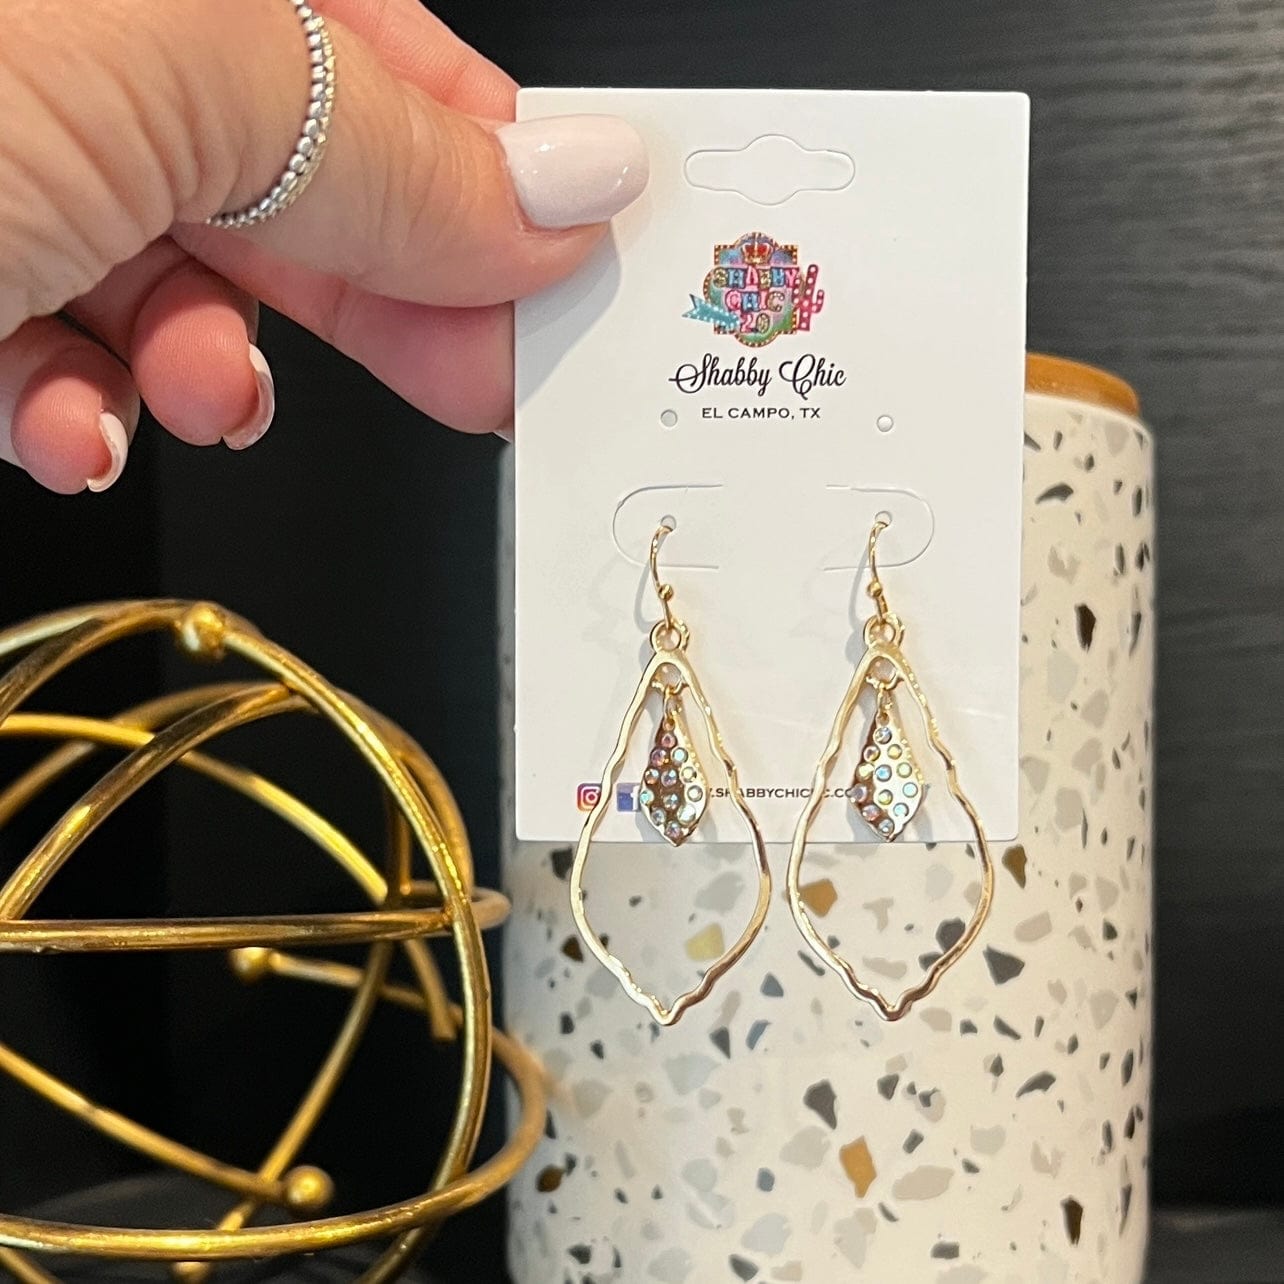 The Pendalum Swings Earrings - Gold Shabby Chic Boutique and Tanning Salon